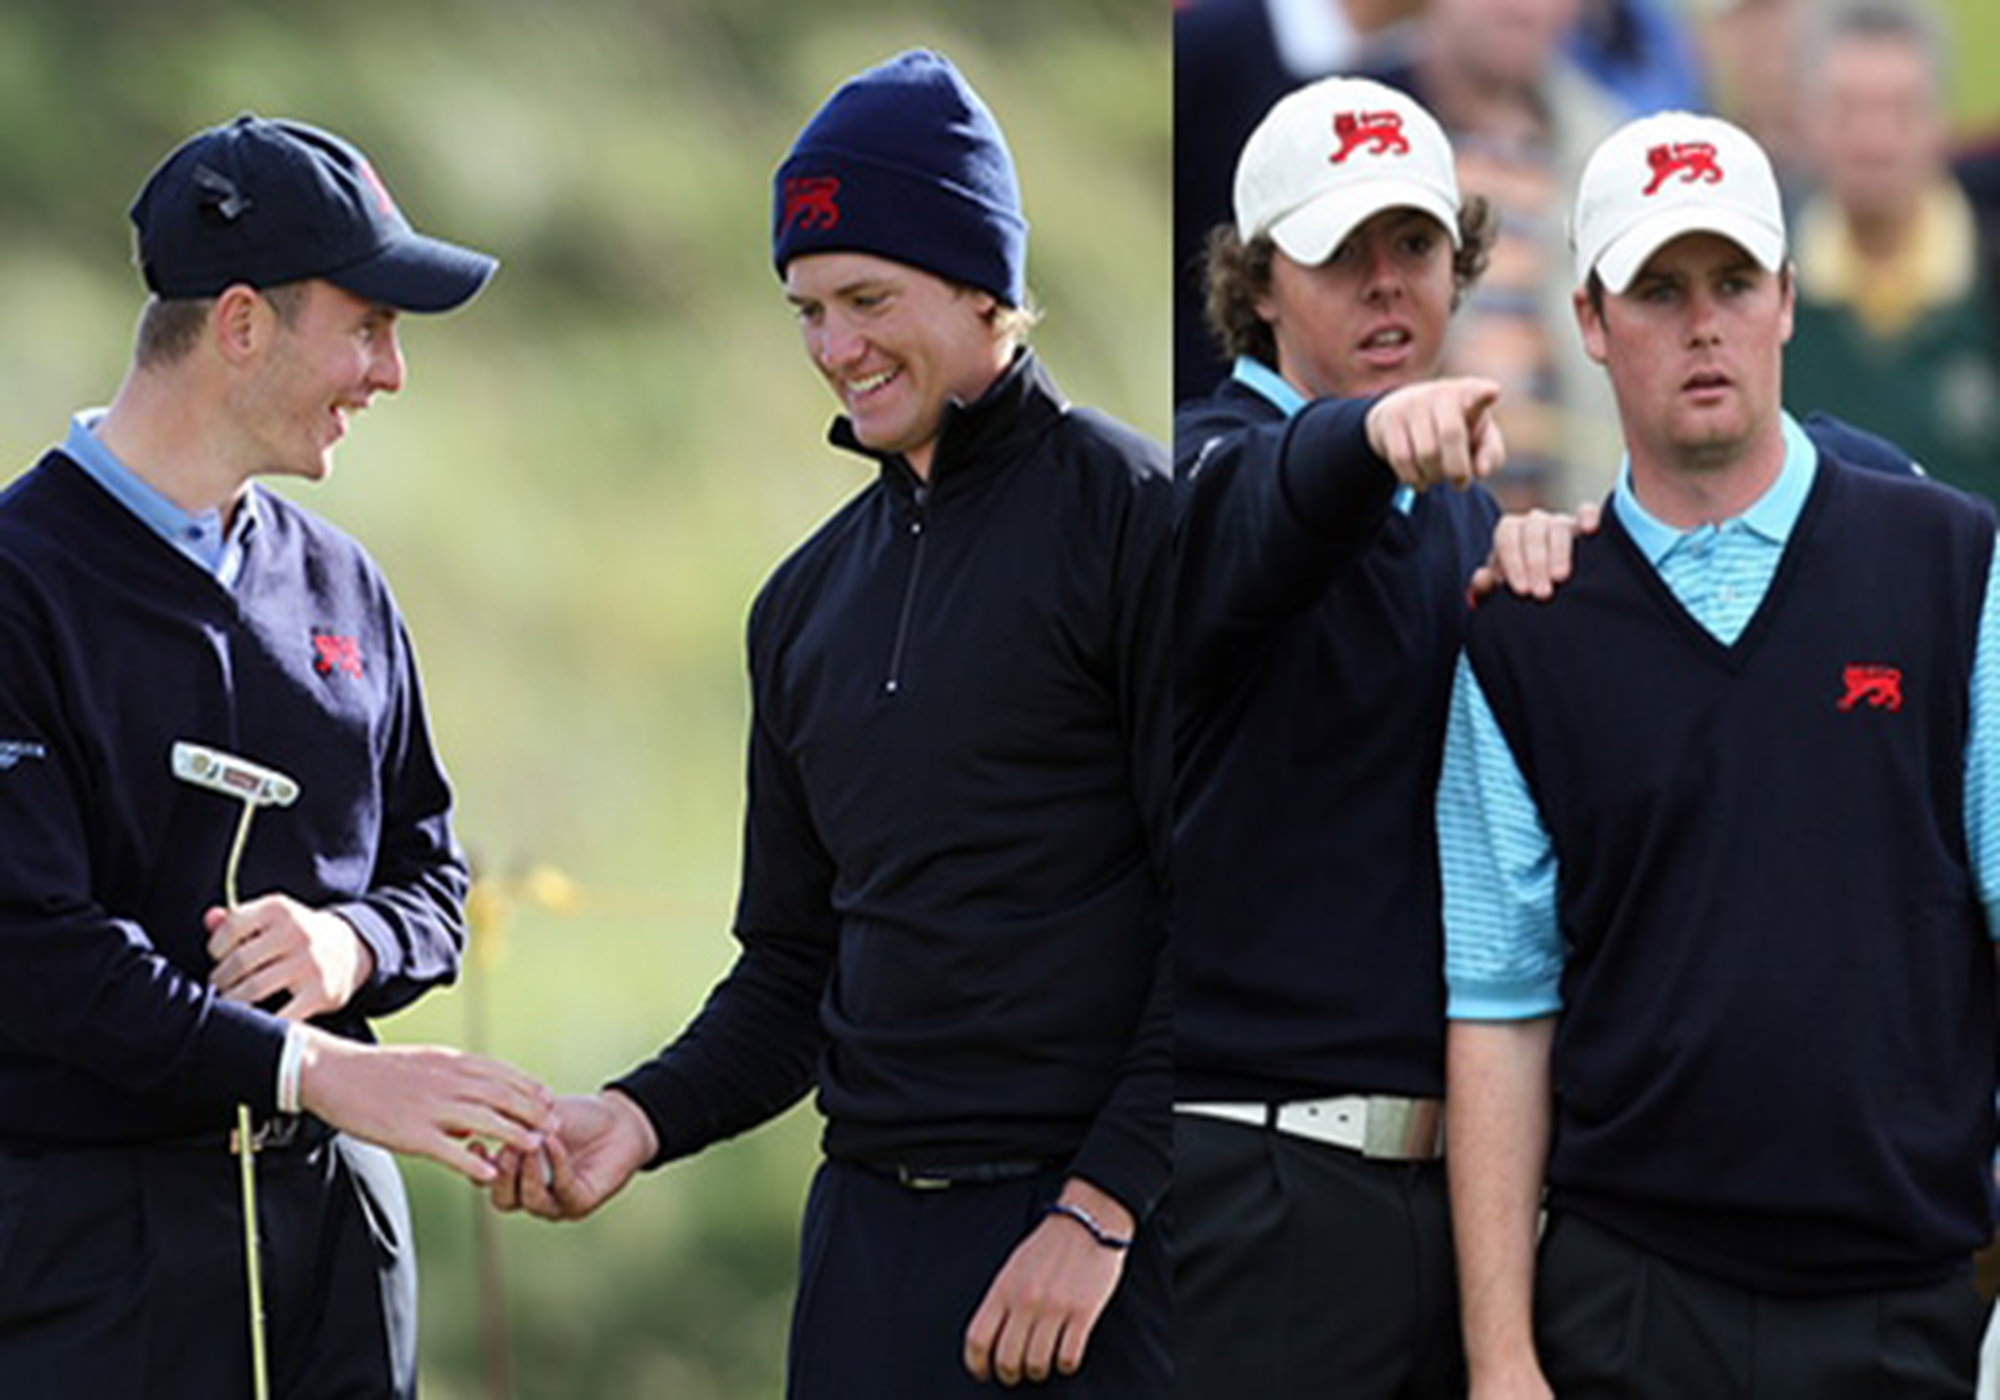 'You think the Walker Cup means a lot but you get on the Challenge Tour and nobody cares'